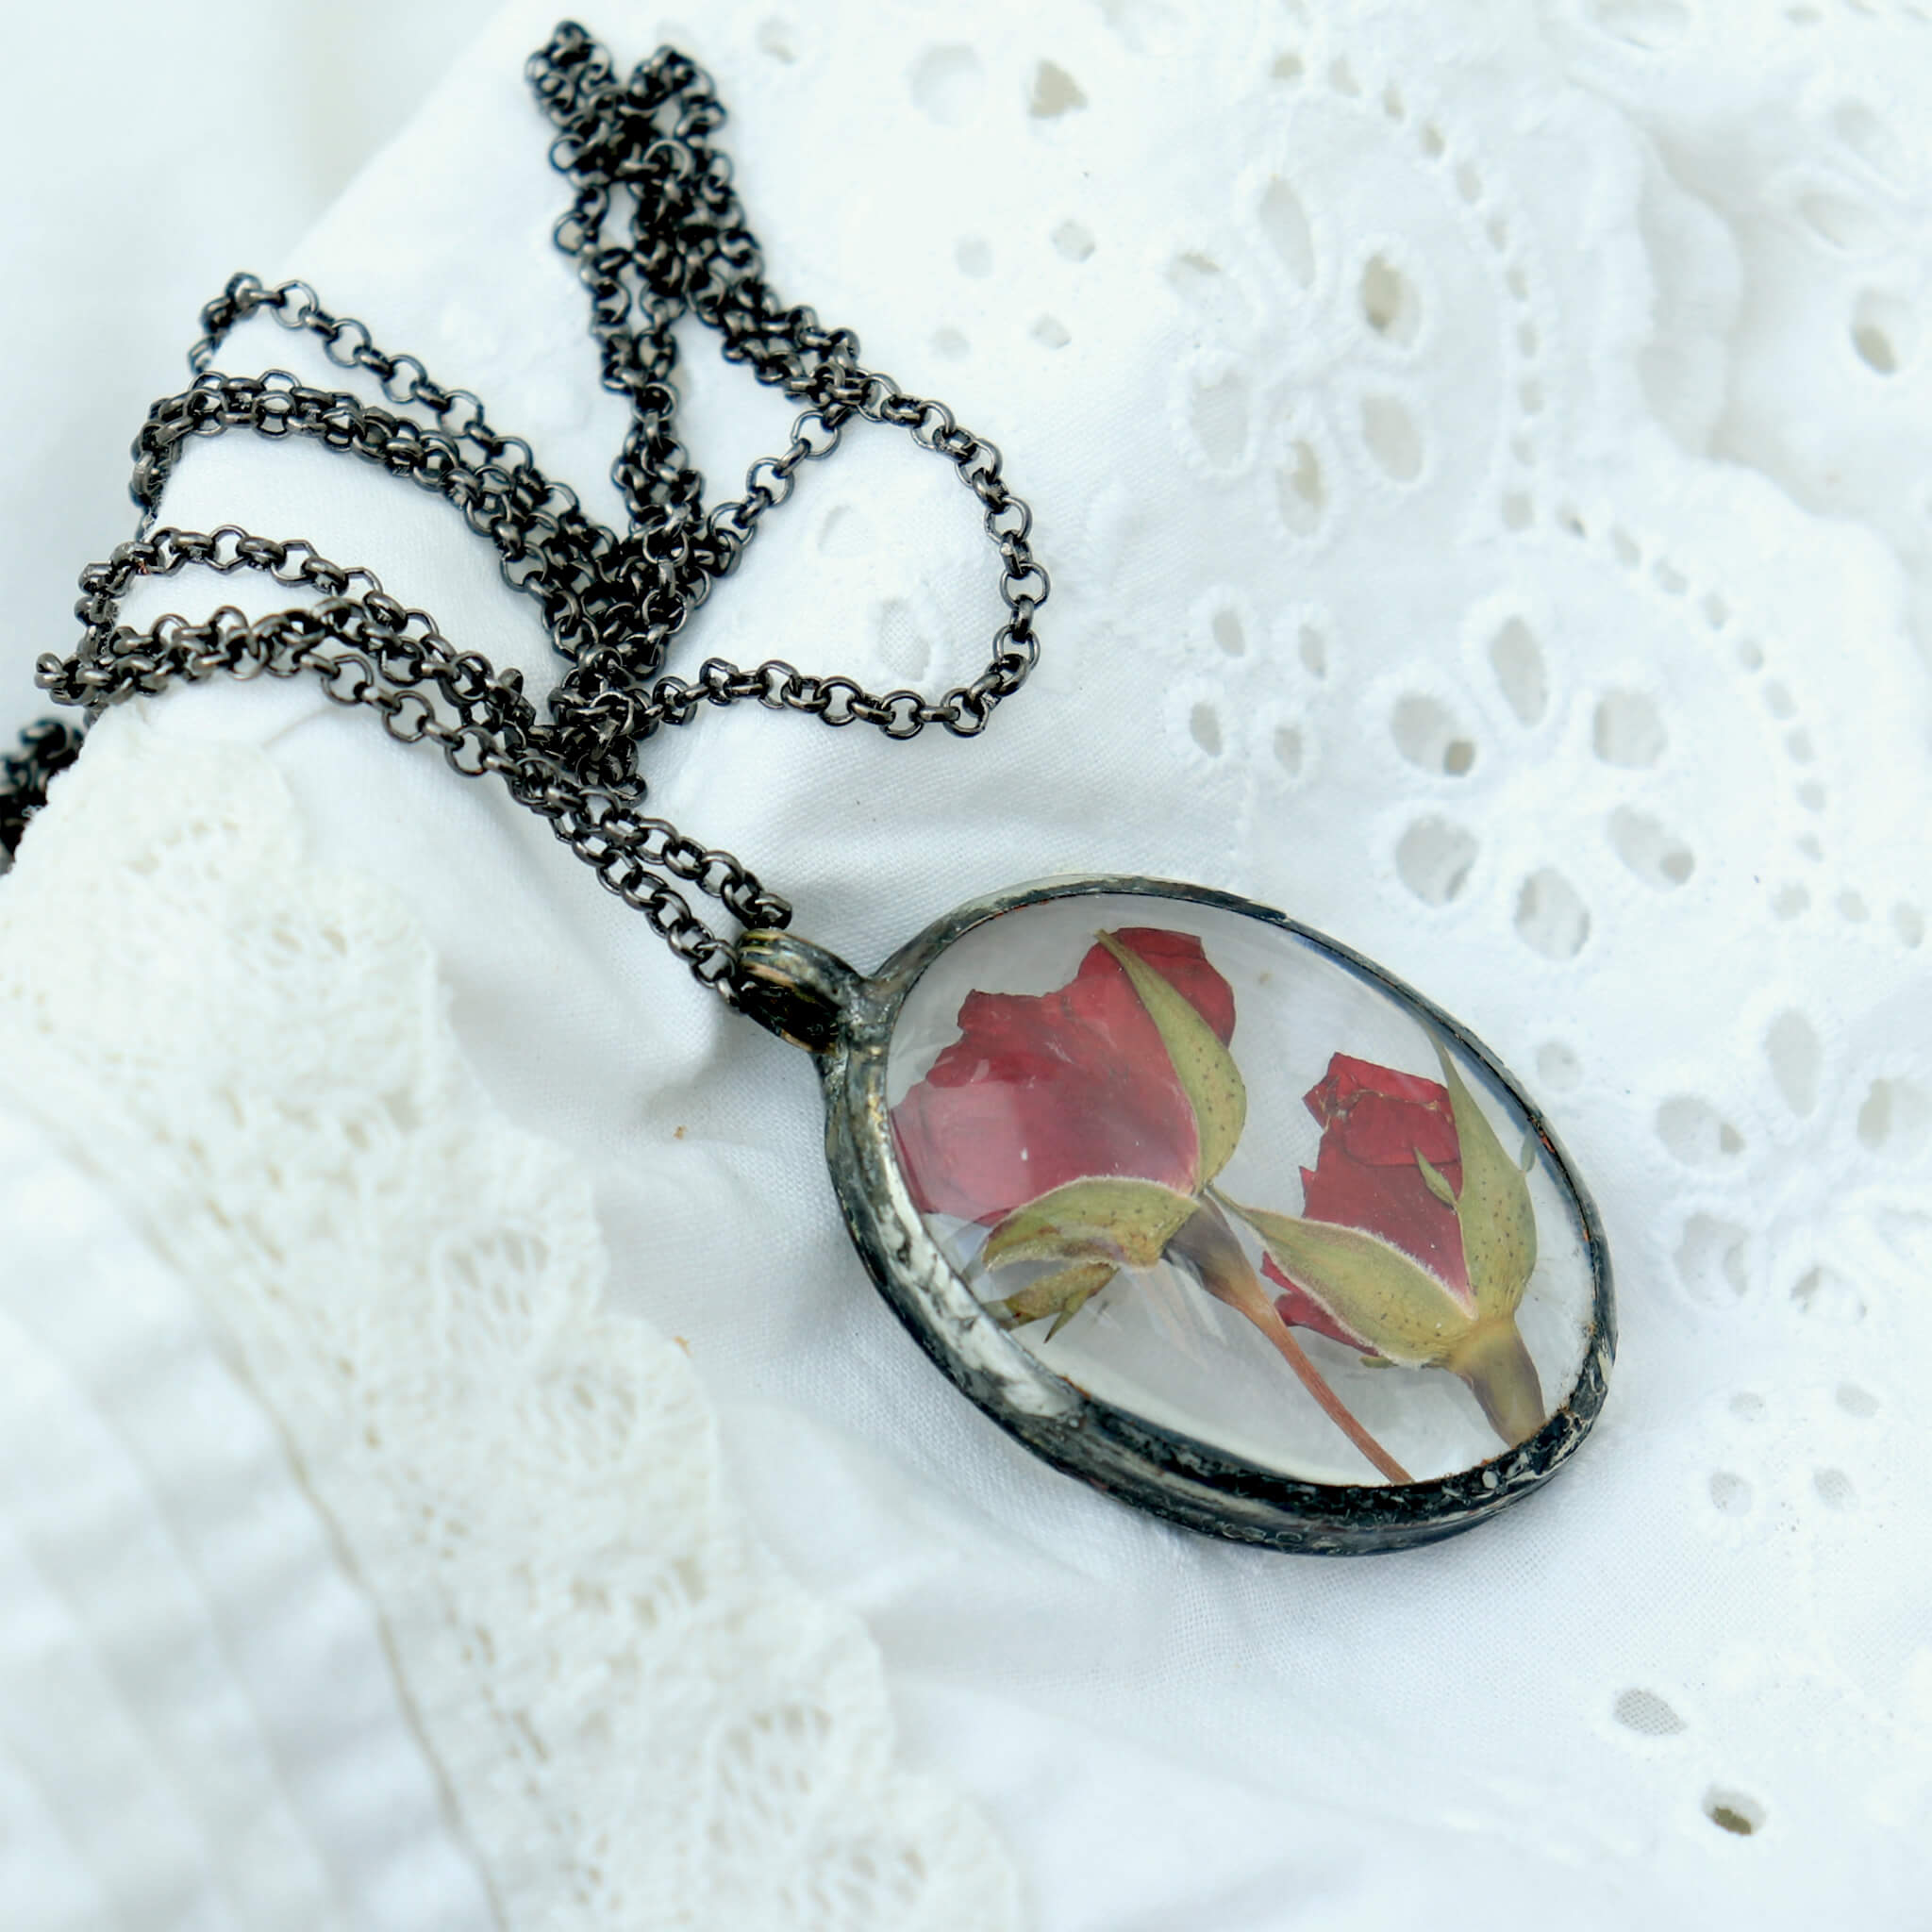 Pressed rose in soldered glass pendant necklace lying on white lace